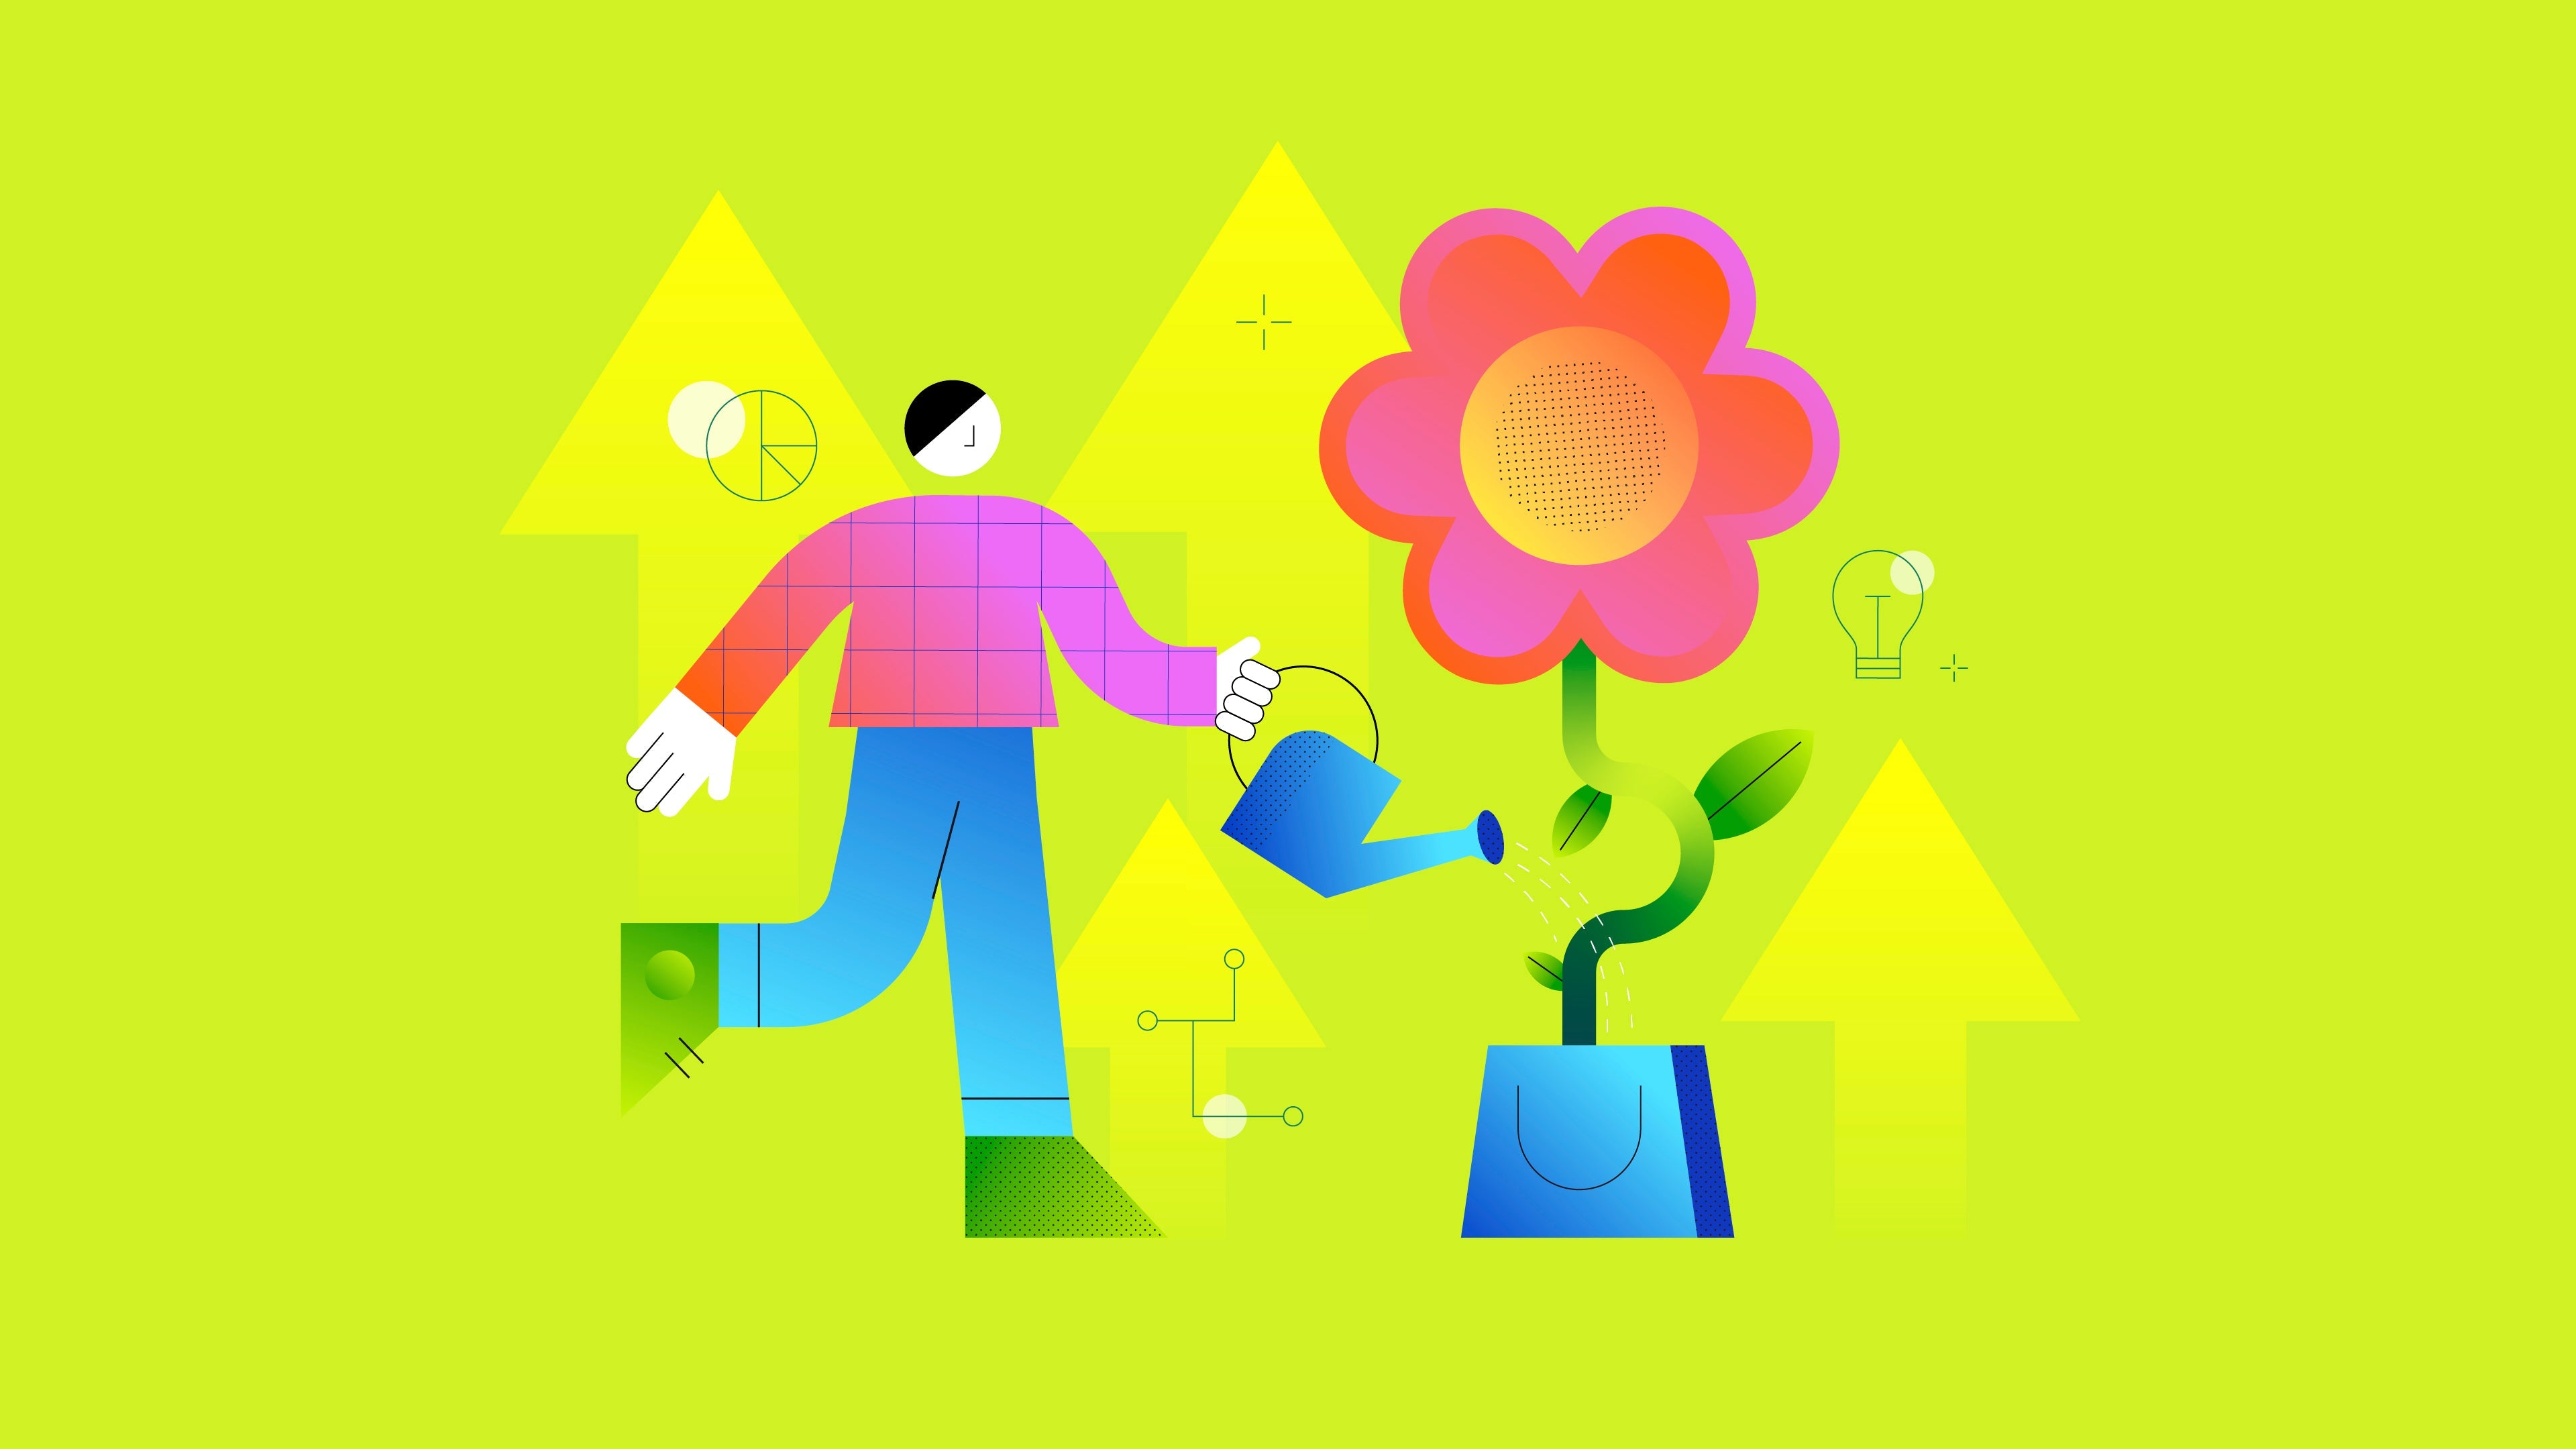 Illustration of a person watering a large pink flower, symbolizing growth, with arrows and icons on a bright green background.